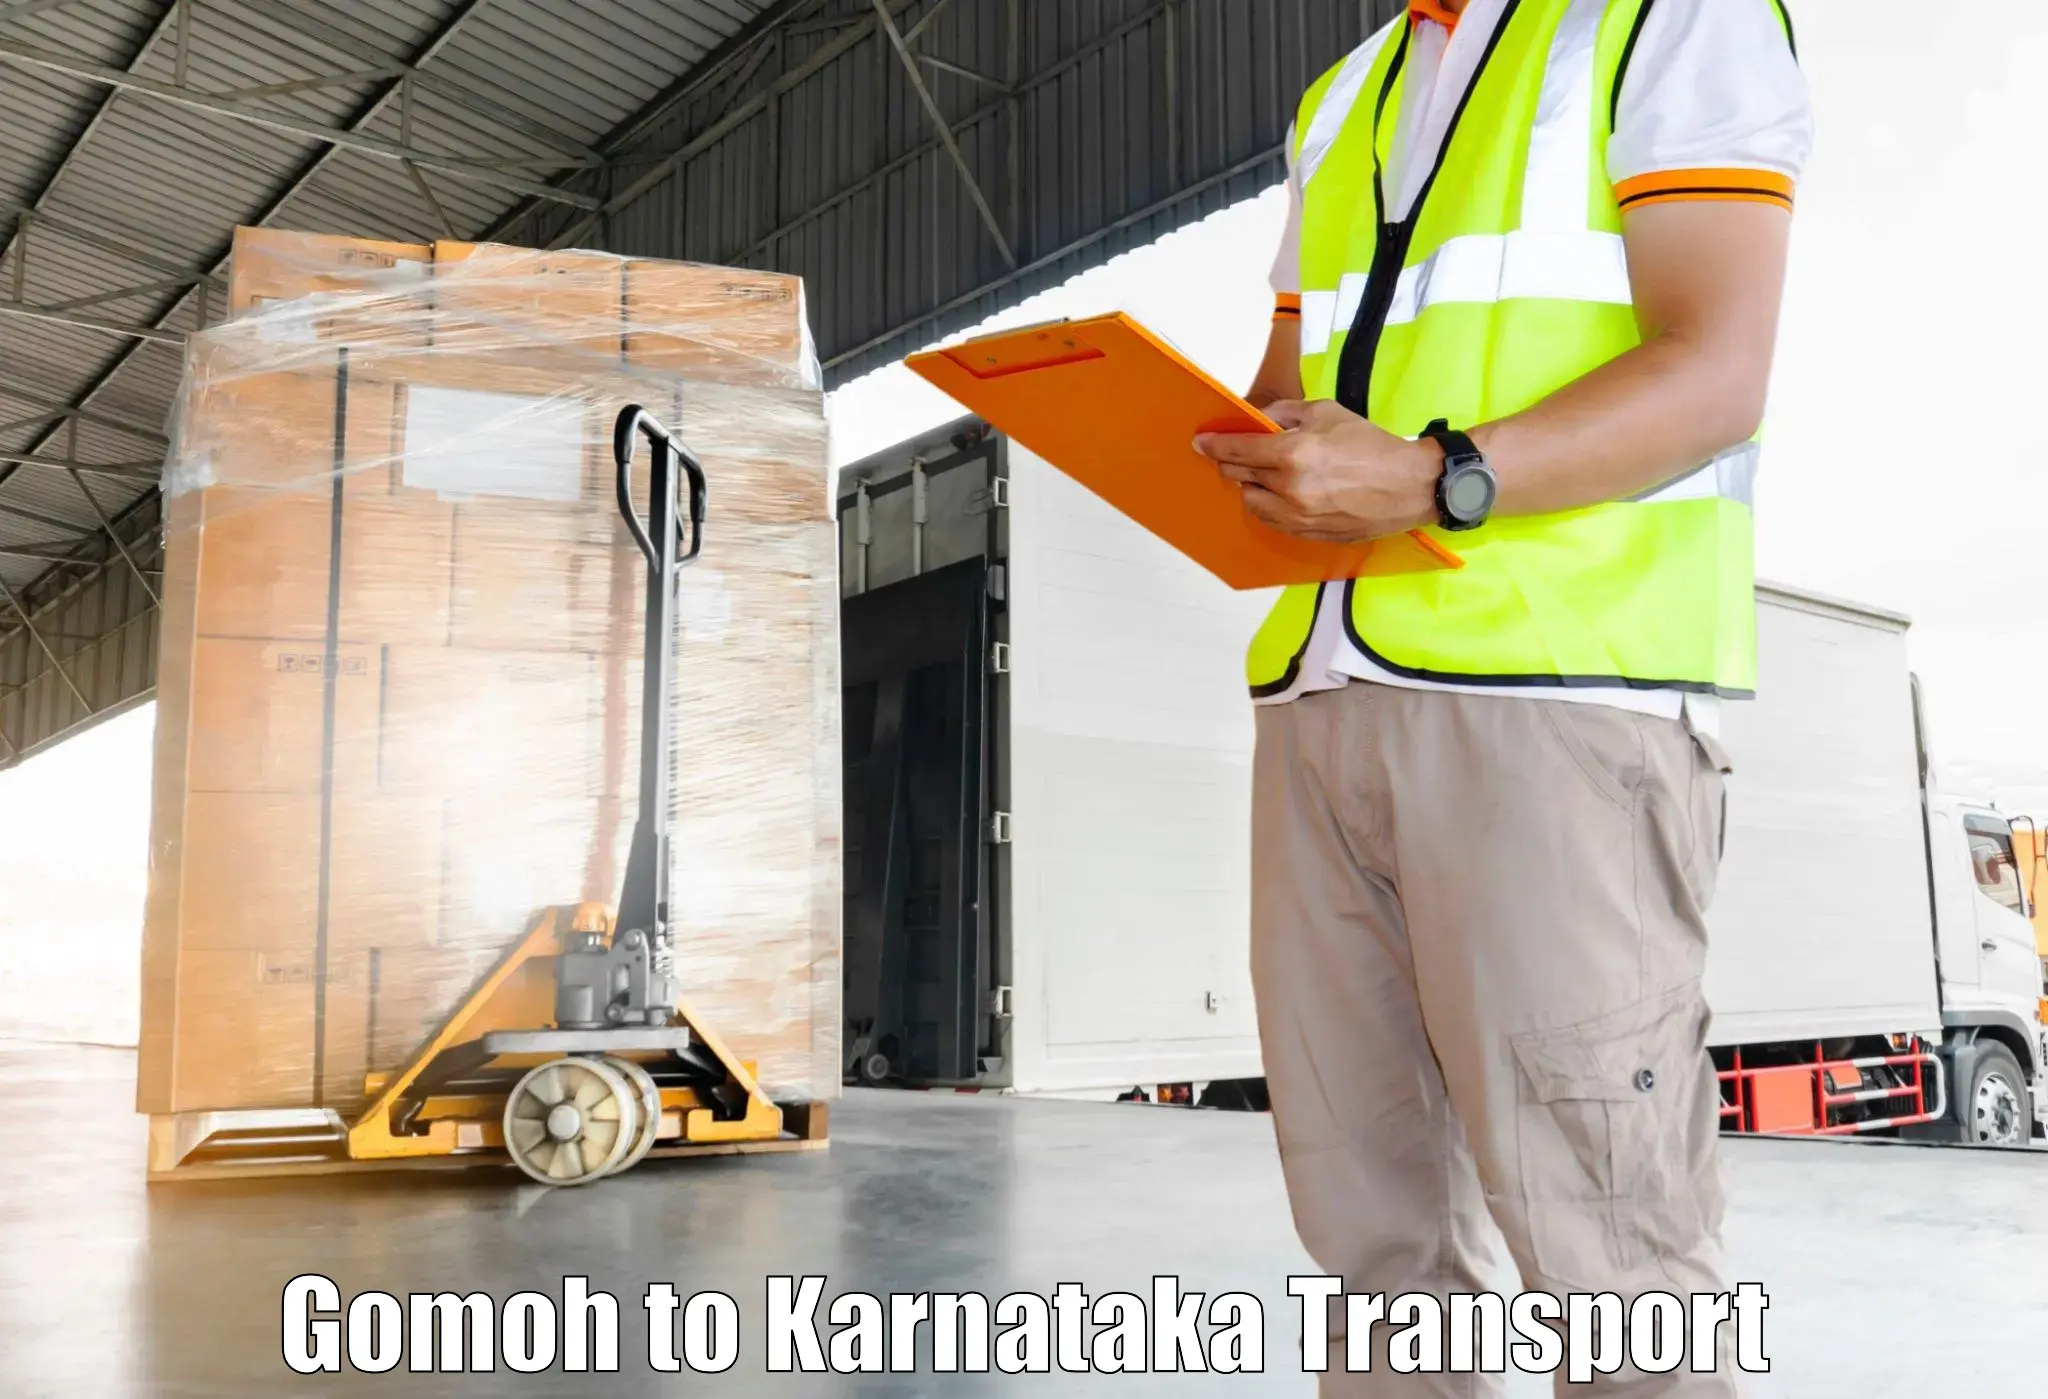 Commercial transport service Gomoh to Mangalore